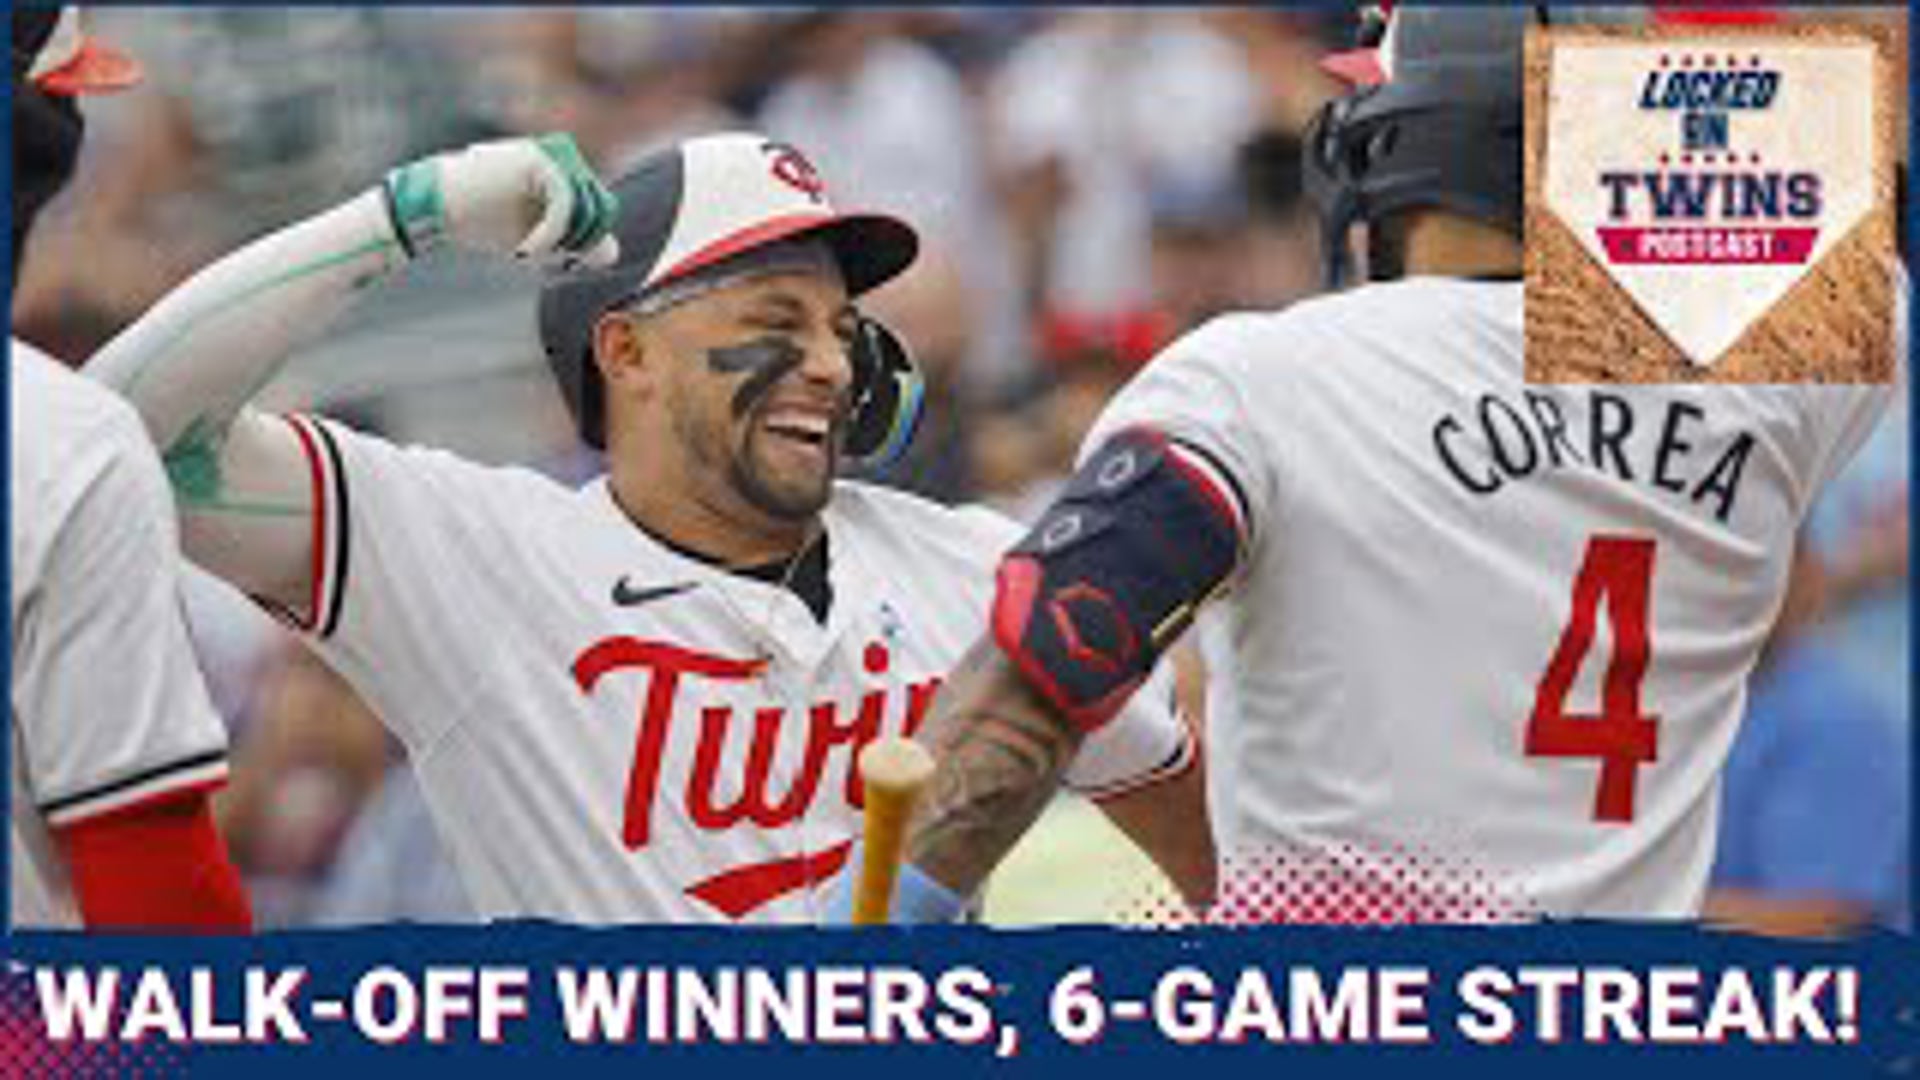 The Minnesota Twins have now won six in a row after tonights walk-off winner from Carlos Santana. Join Luke Inman and Lou Hennesey for the instant reaction.